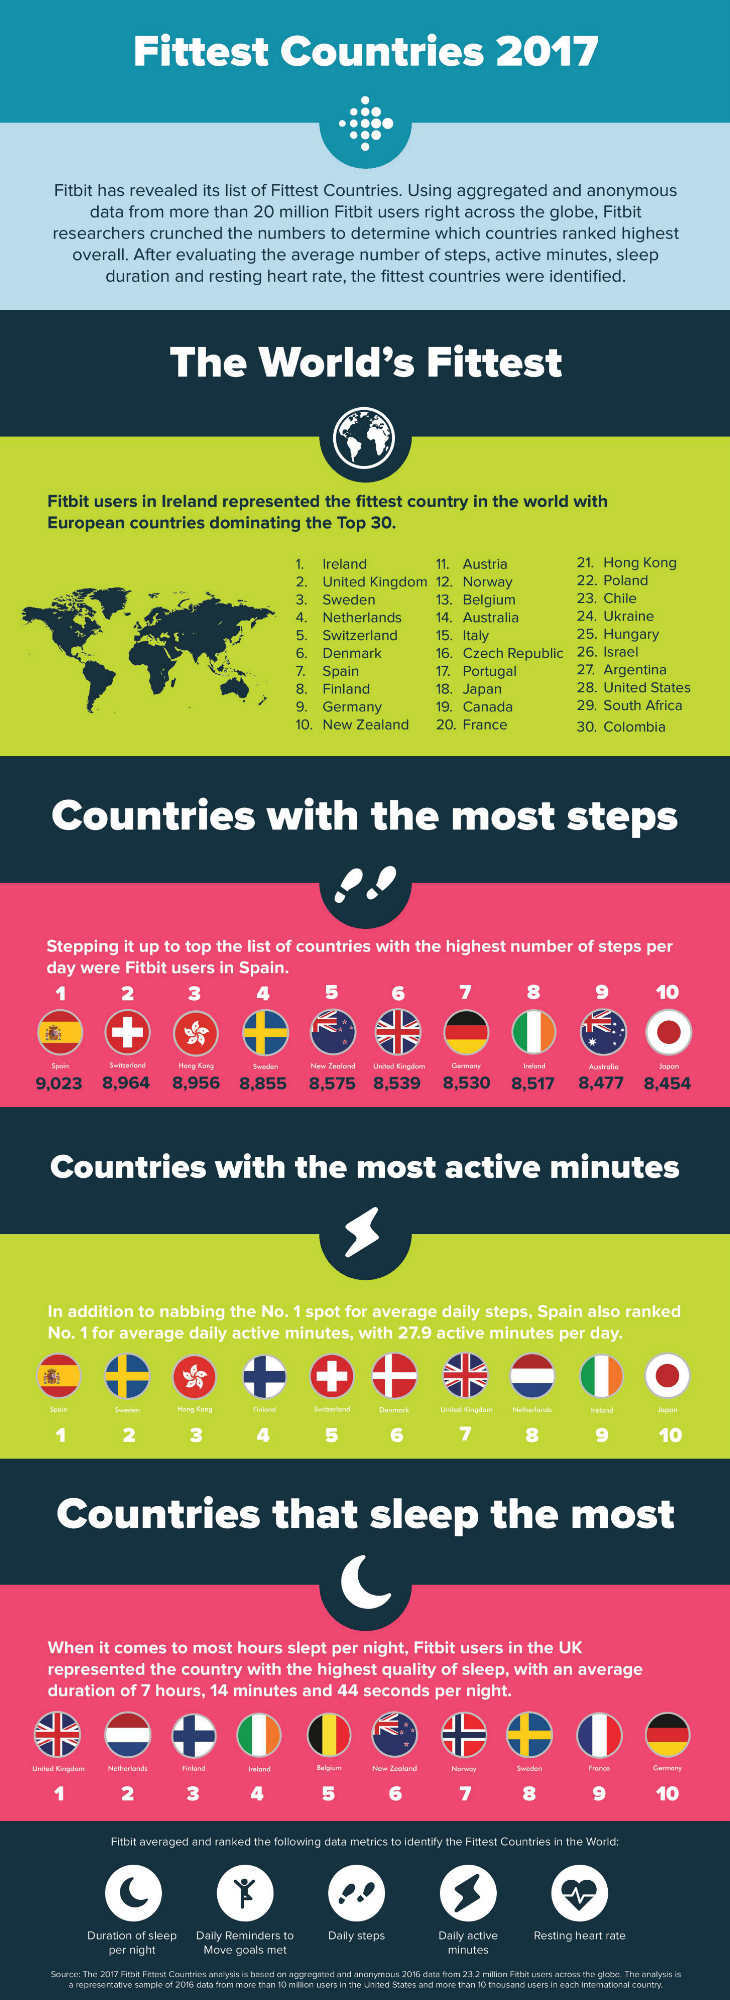 Fitbit Fittest Countries 2017